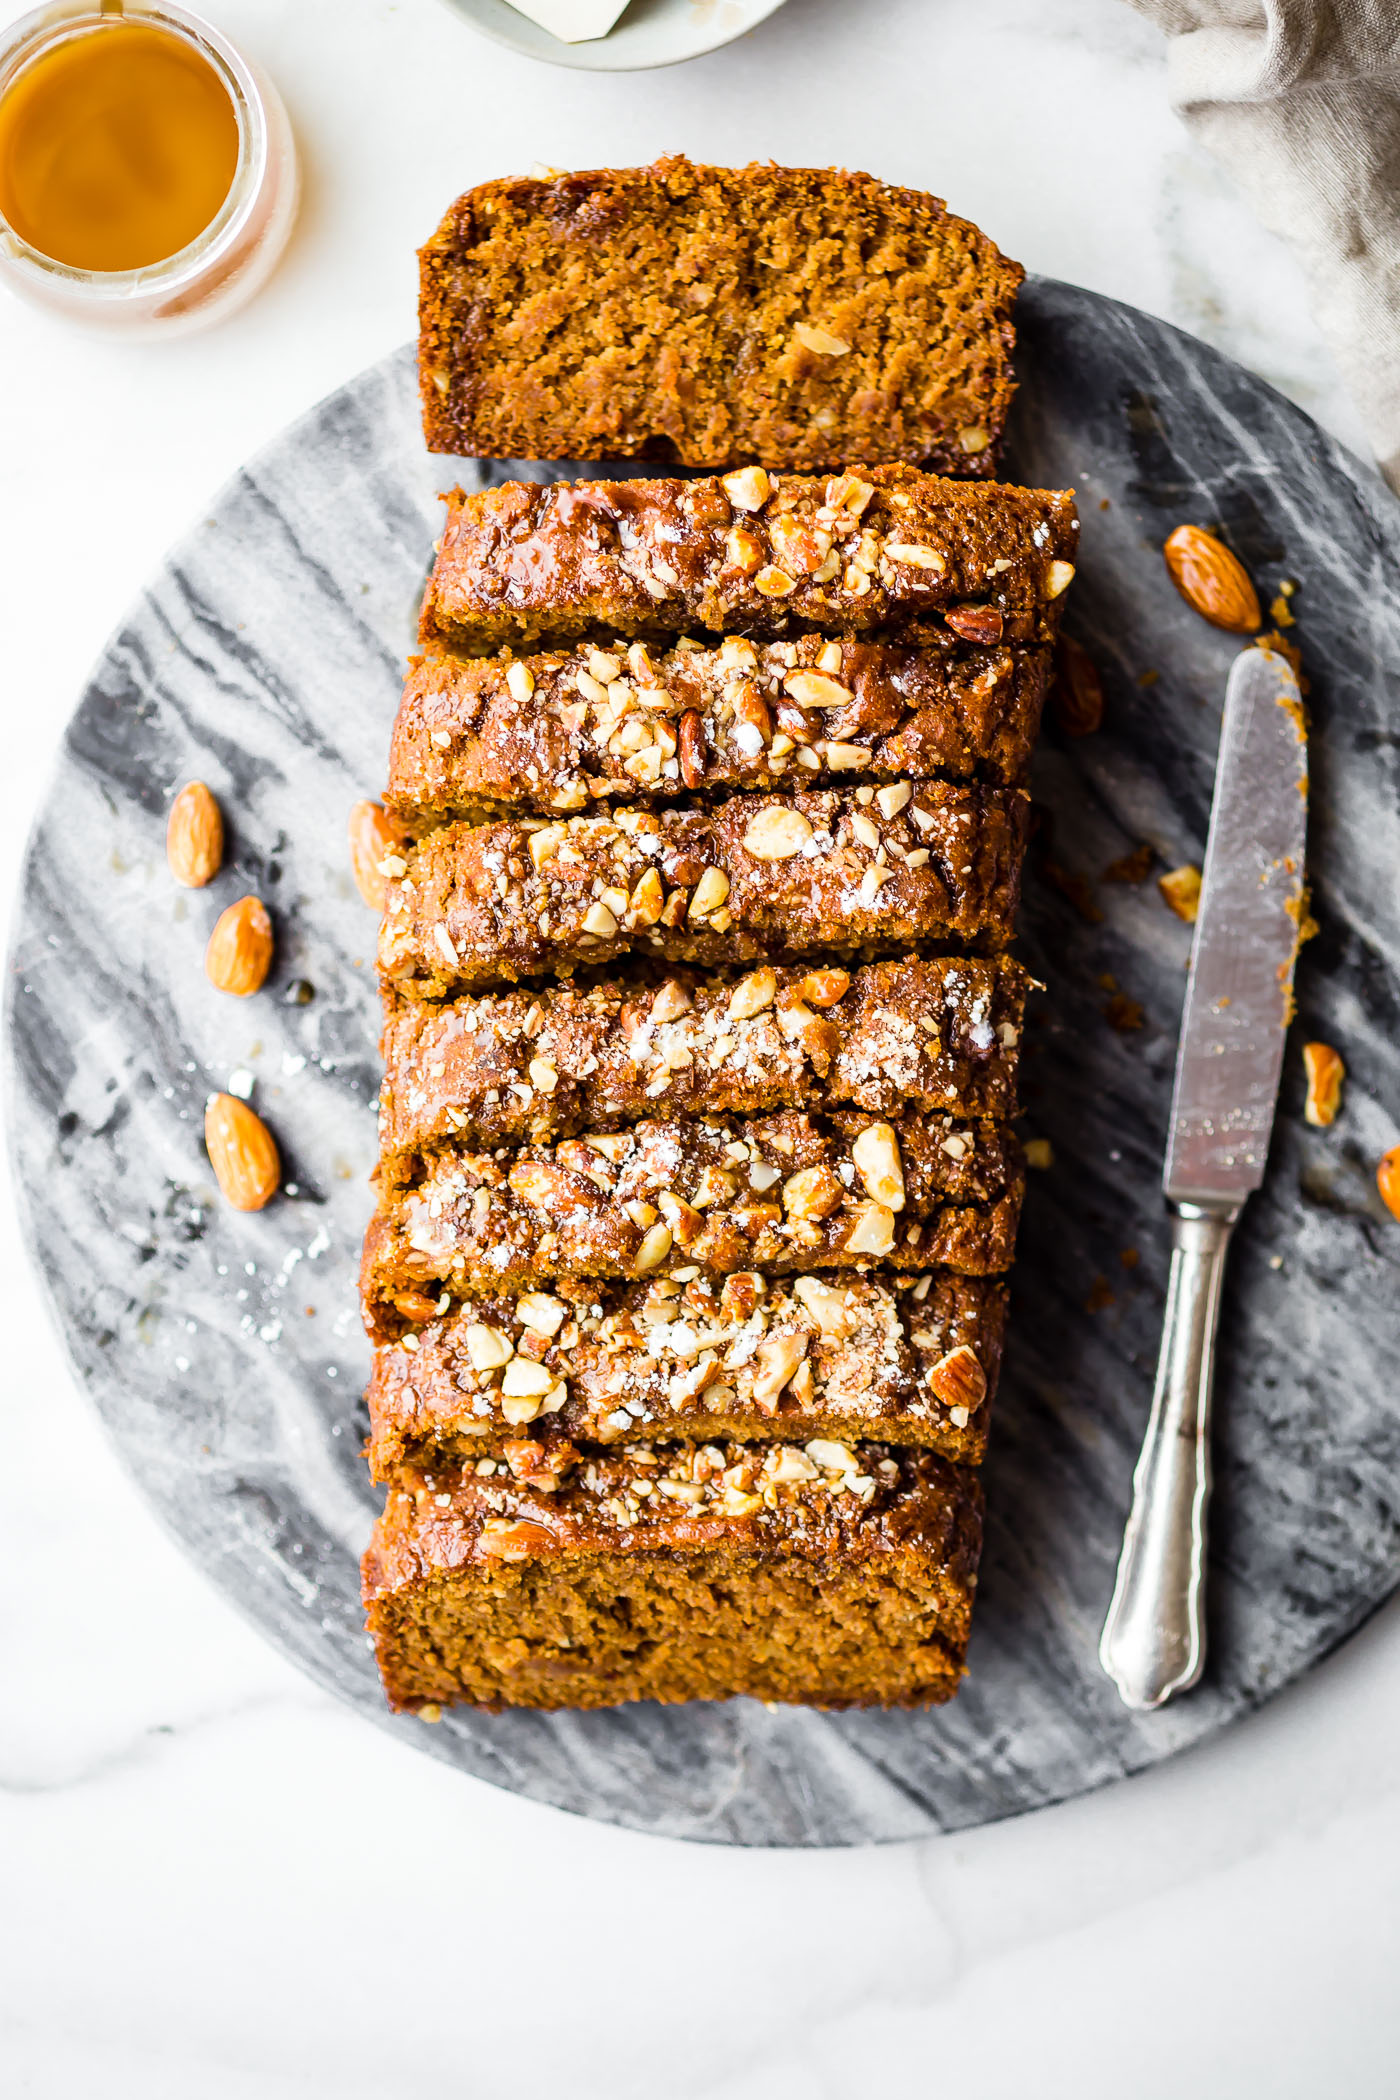 This Vegan Maple Almond Earl Grey Tea cake is lightly sweet and simple. A gluten free buttery tea cake loaf infused with Earl Grey tea and a hint cardamon! The maple almond glaze is the perfect topping. Quick to make in one pan and bakes up in under 45 minutes!